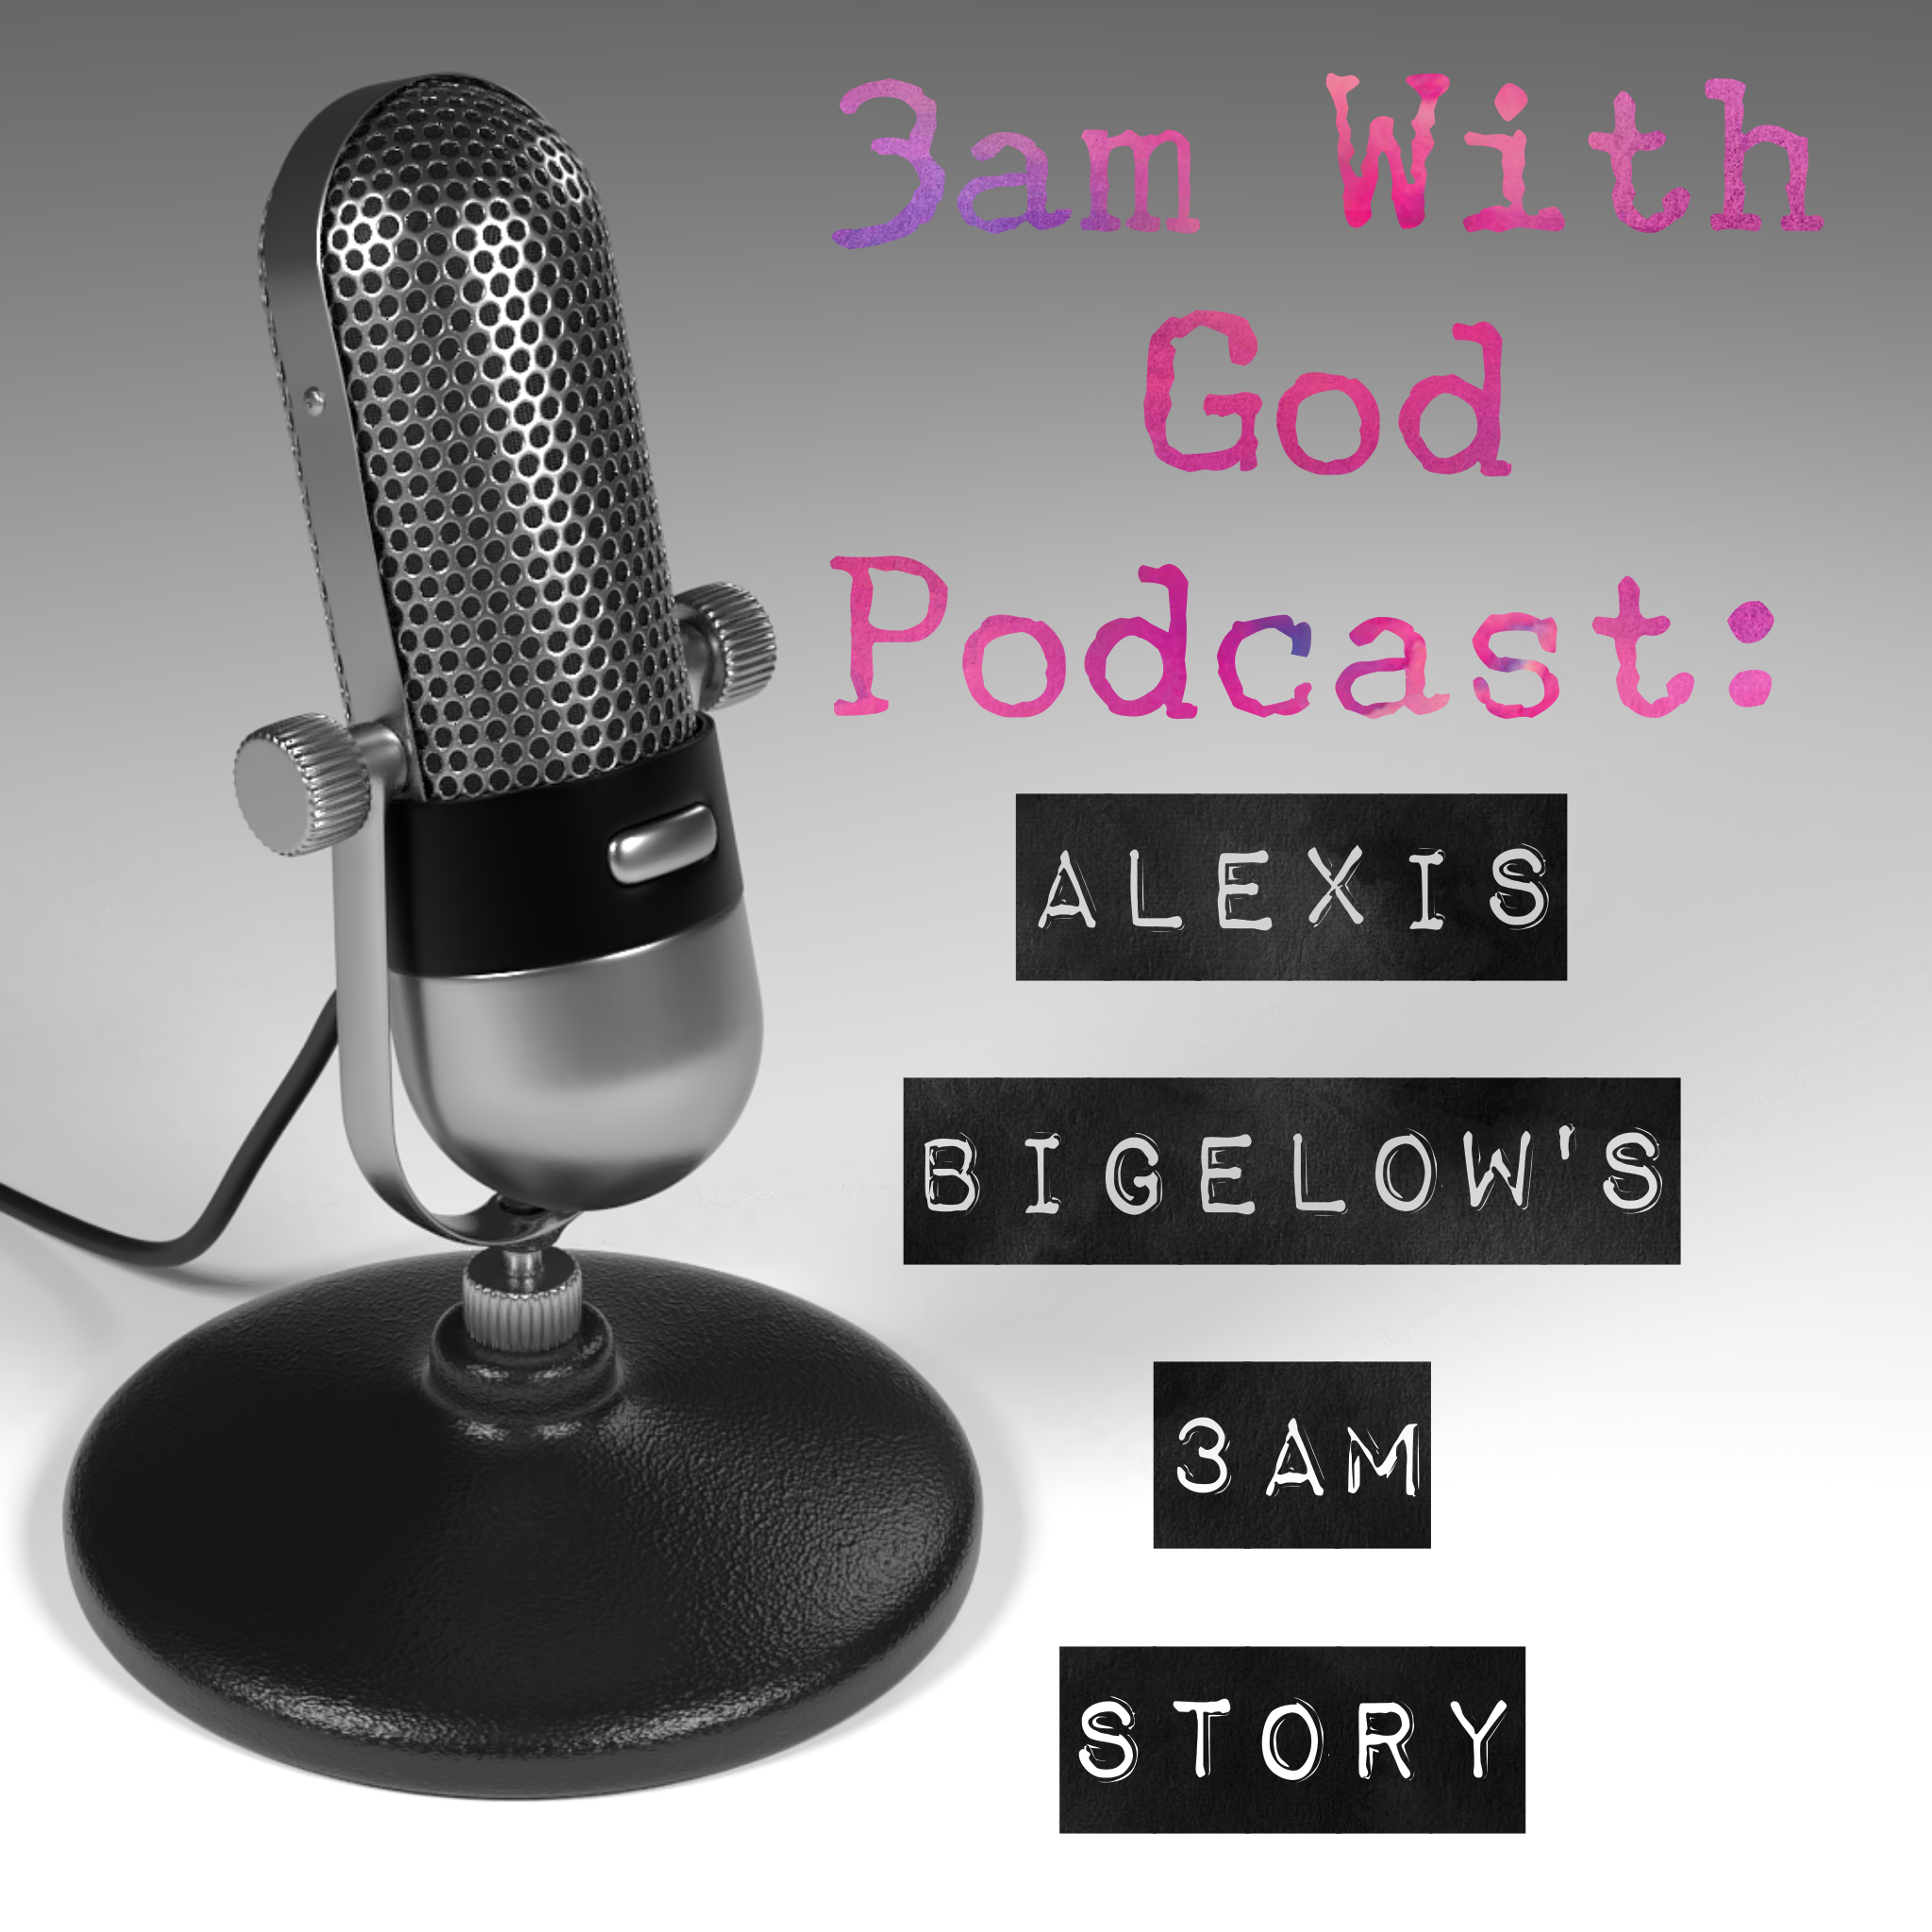 Alexis Bigelow guest on the 3am With God Podcast